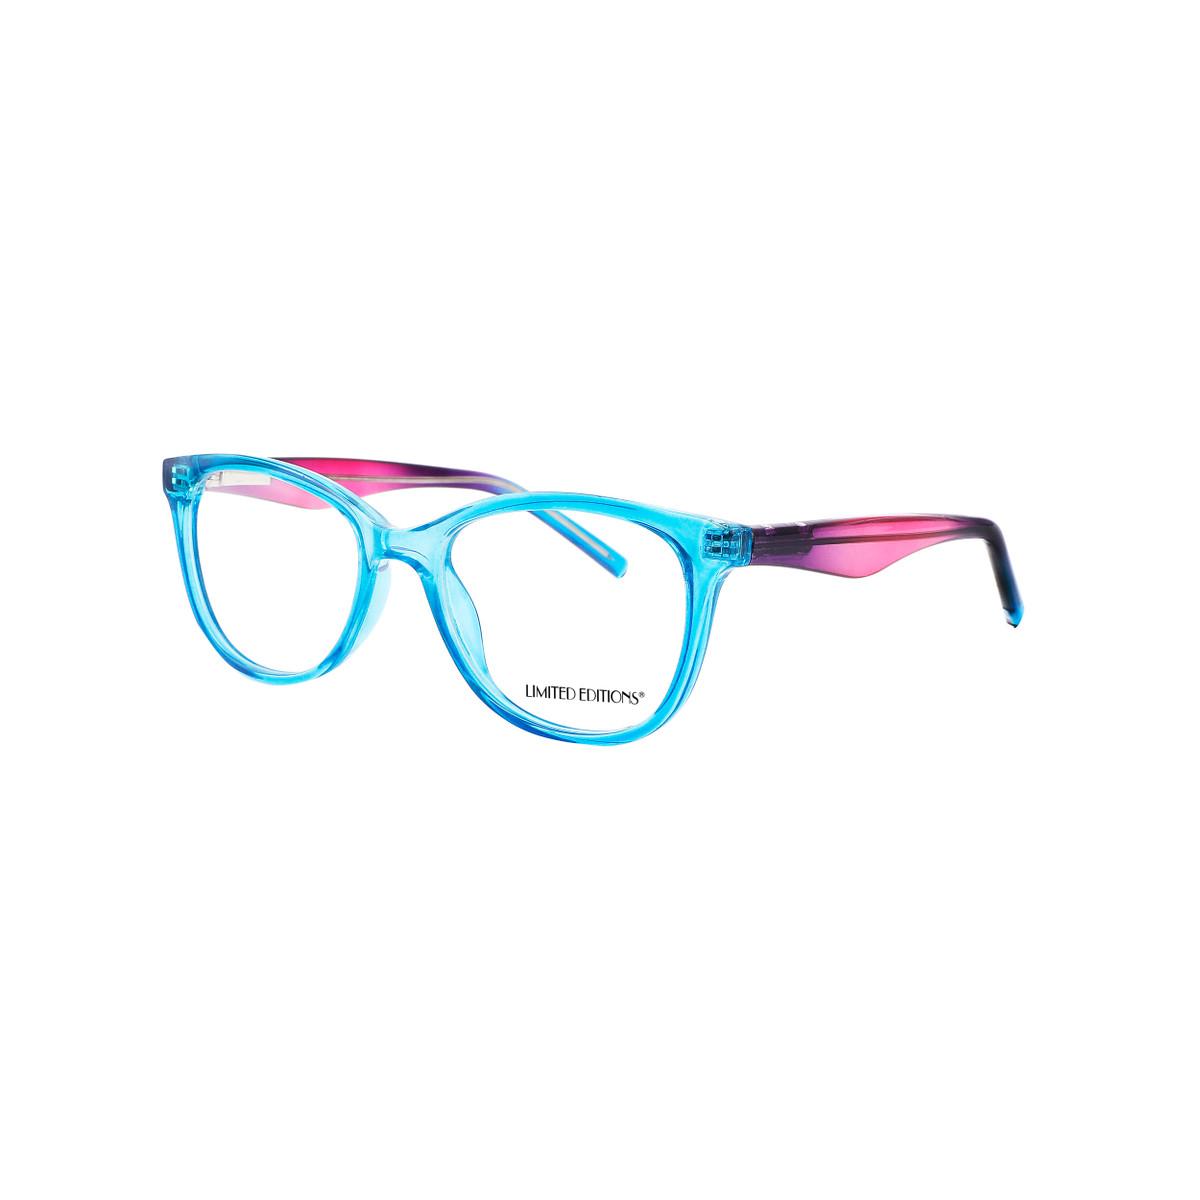 LIMITED EDITIONS 2243 Eyeglasses